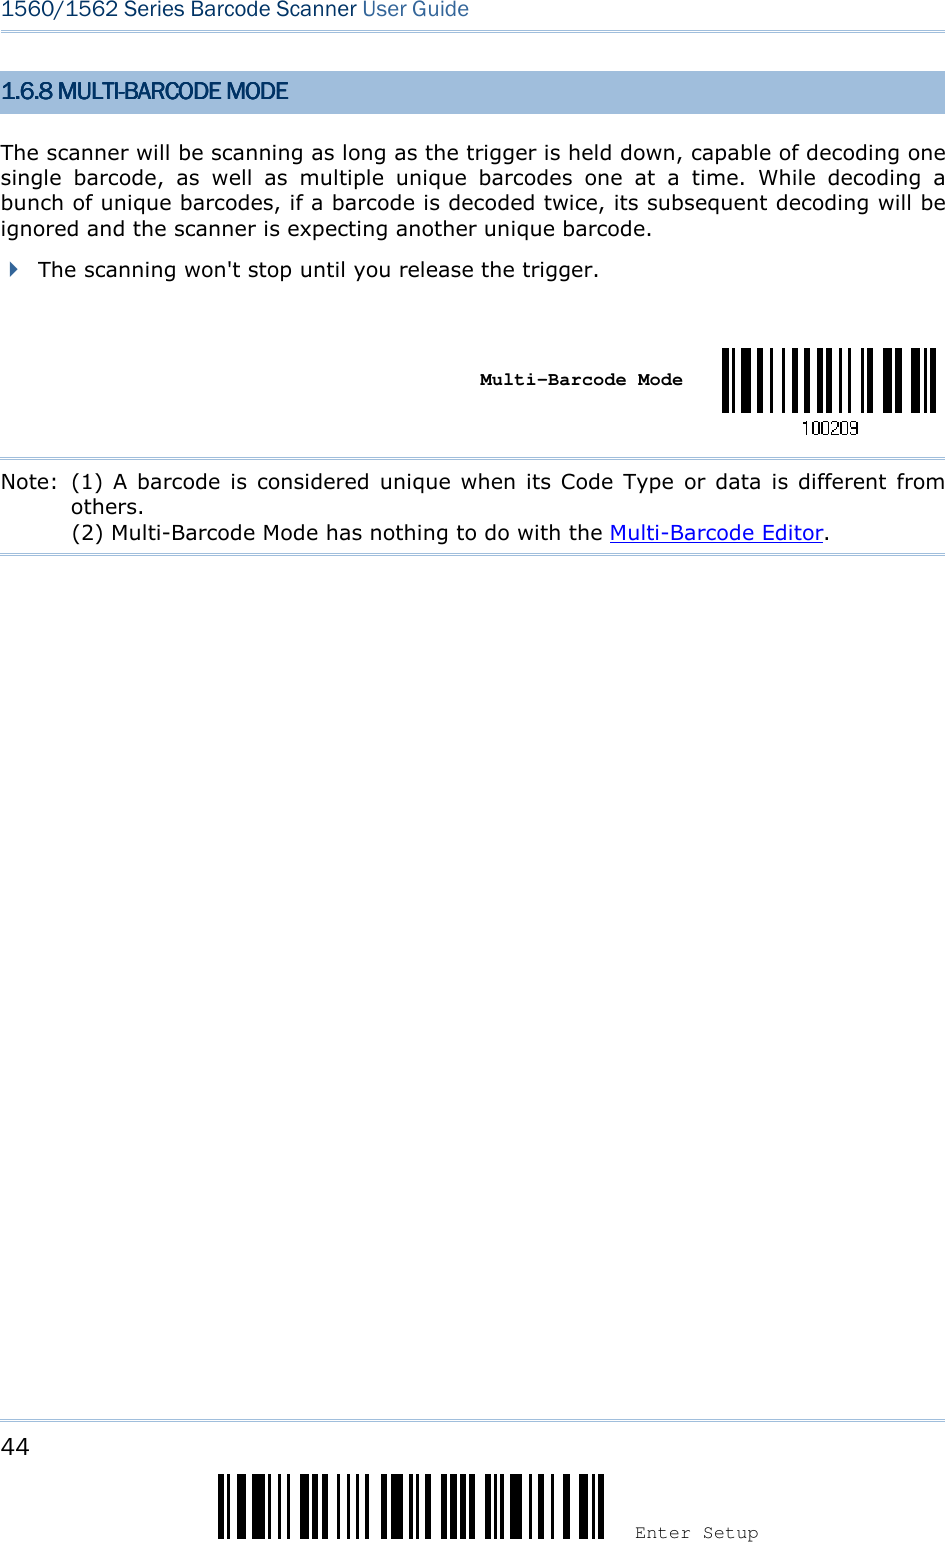 44 Enter Setup 1560/1562 Series Barcode Scanner User Guide  1.1.1.1.6666....8888    MULTIMULTIMULTIMULTI----BARCODE MODEBARCODE MODEBARCODE MODEBARCODE MODE    The scanner will be scanning as long as the trigger is held down, capable of decoding one single  barcode,  as  well  as  multiple  unique  barcodes  one  at  a  time.  While  decoding  a bunch of unique barcodes, if a barcode is decoded twice, its subsequent decoding will be ignored and the scanner is expecting another unique barcode.  The scanning won&apos;t stop until you release the trigger.     Multi-Barcode Mode   Note:  (1)  A barcode is  considered unique when its  Code  Type  or data  is  different  from others.                     (2) Multi-Barcode Mode has nothing to do with the Multi-Barcode Editor.                  